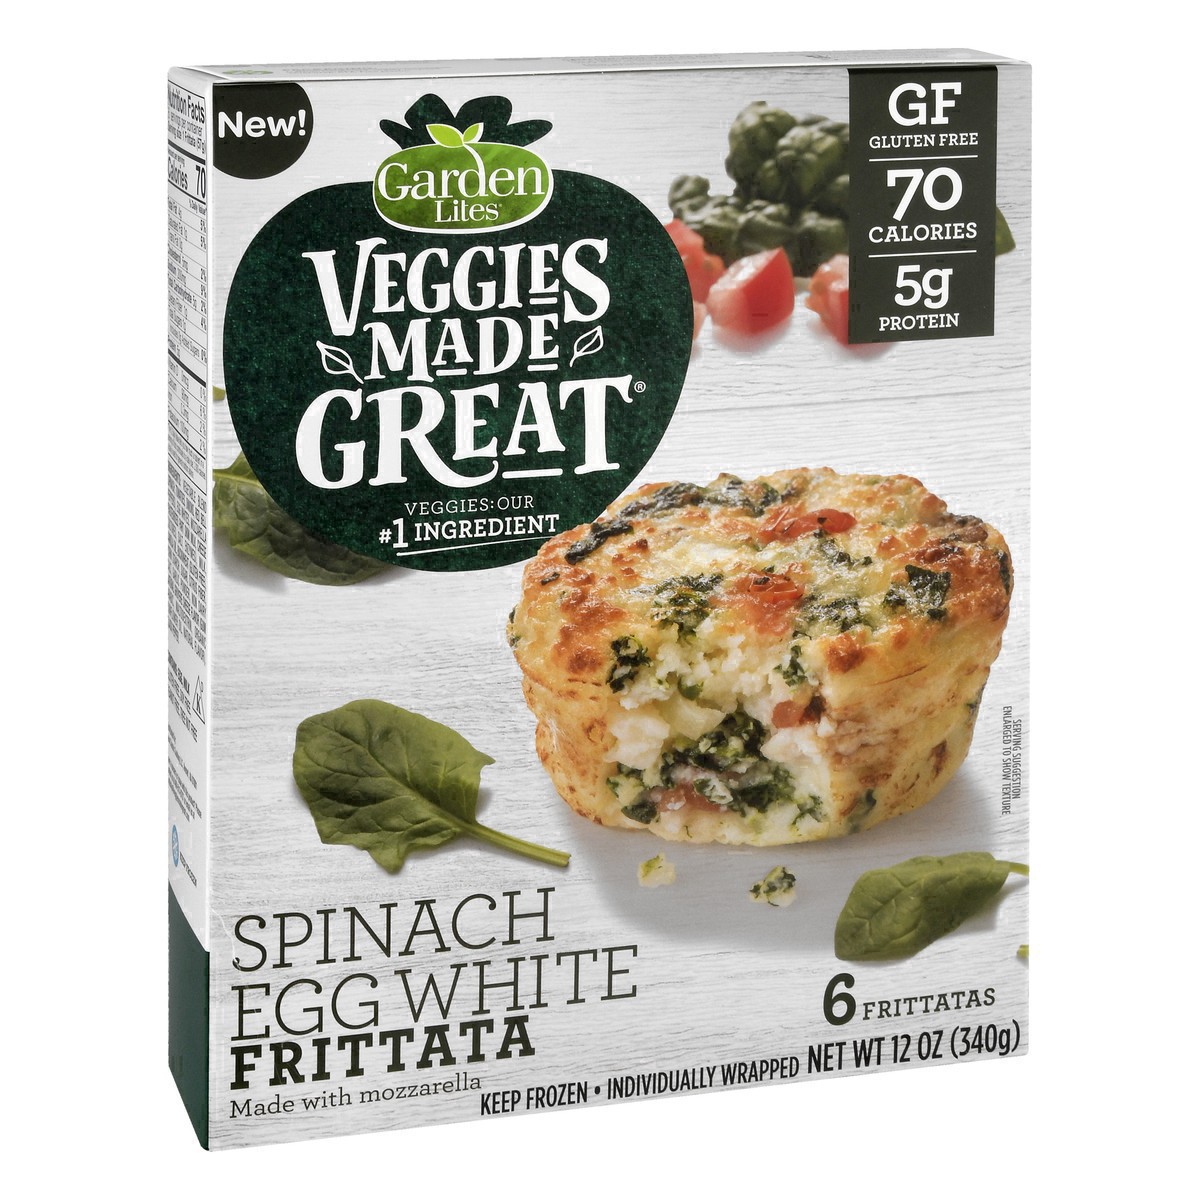 slide 30 of 76, Veggies Made Great Spinach Egg White Frittata 6 ea, 6 ct